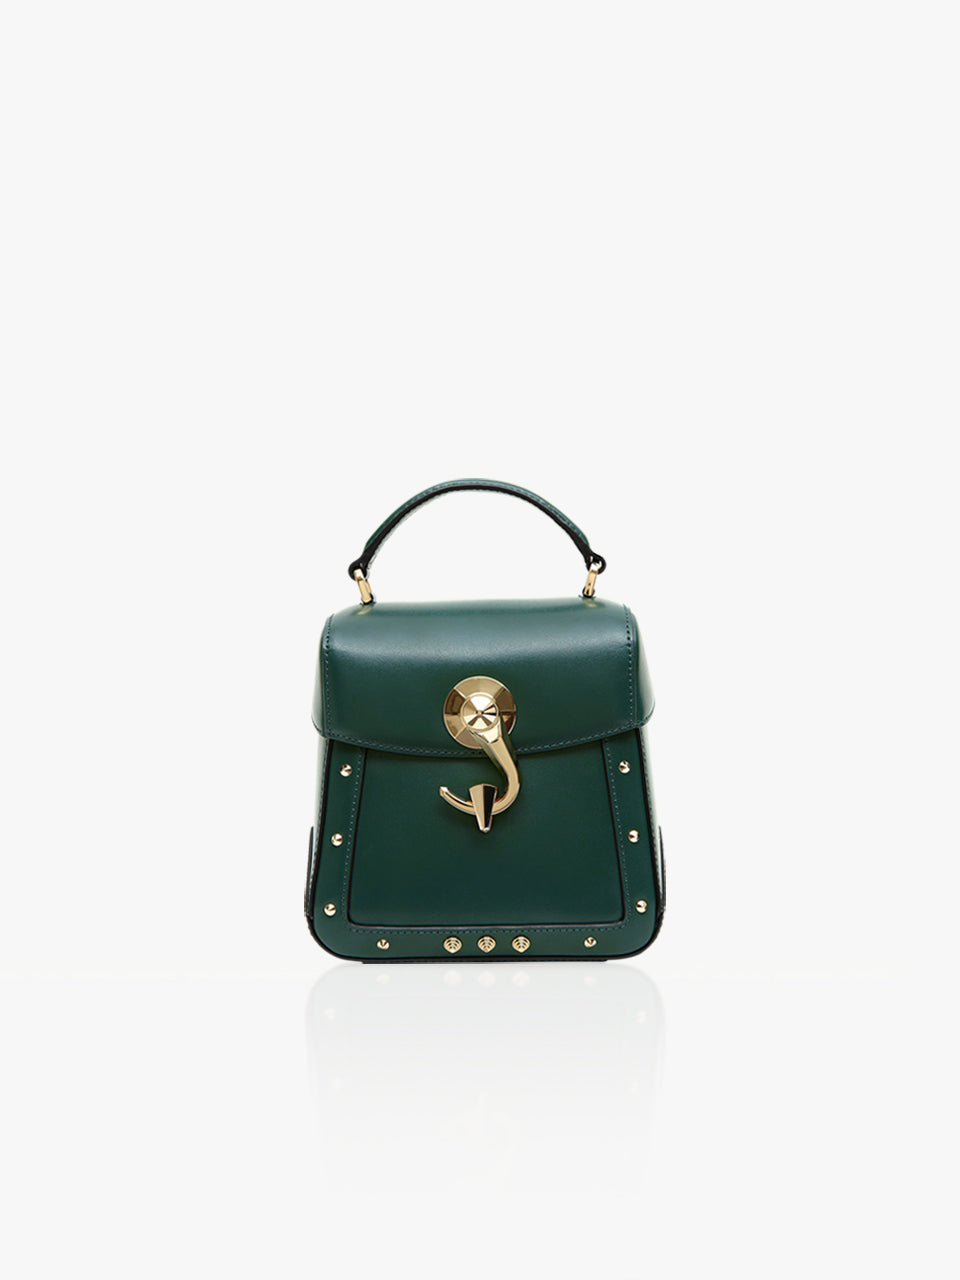 Trunkino Bag_S_Solid Moss Green